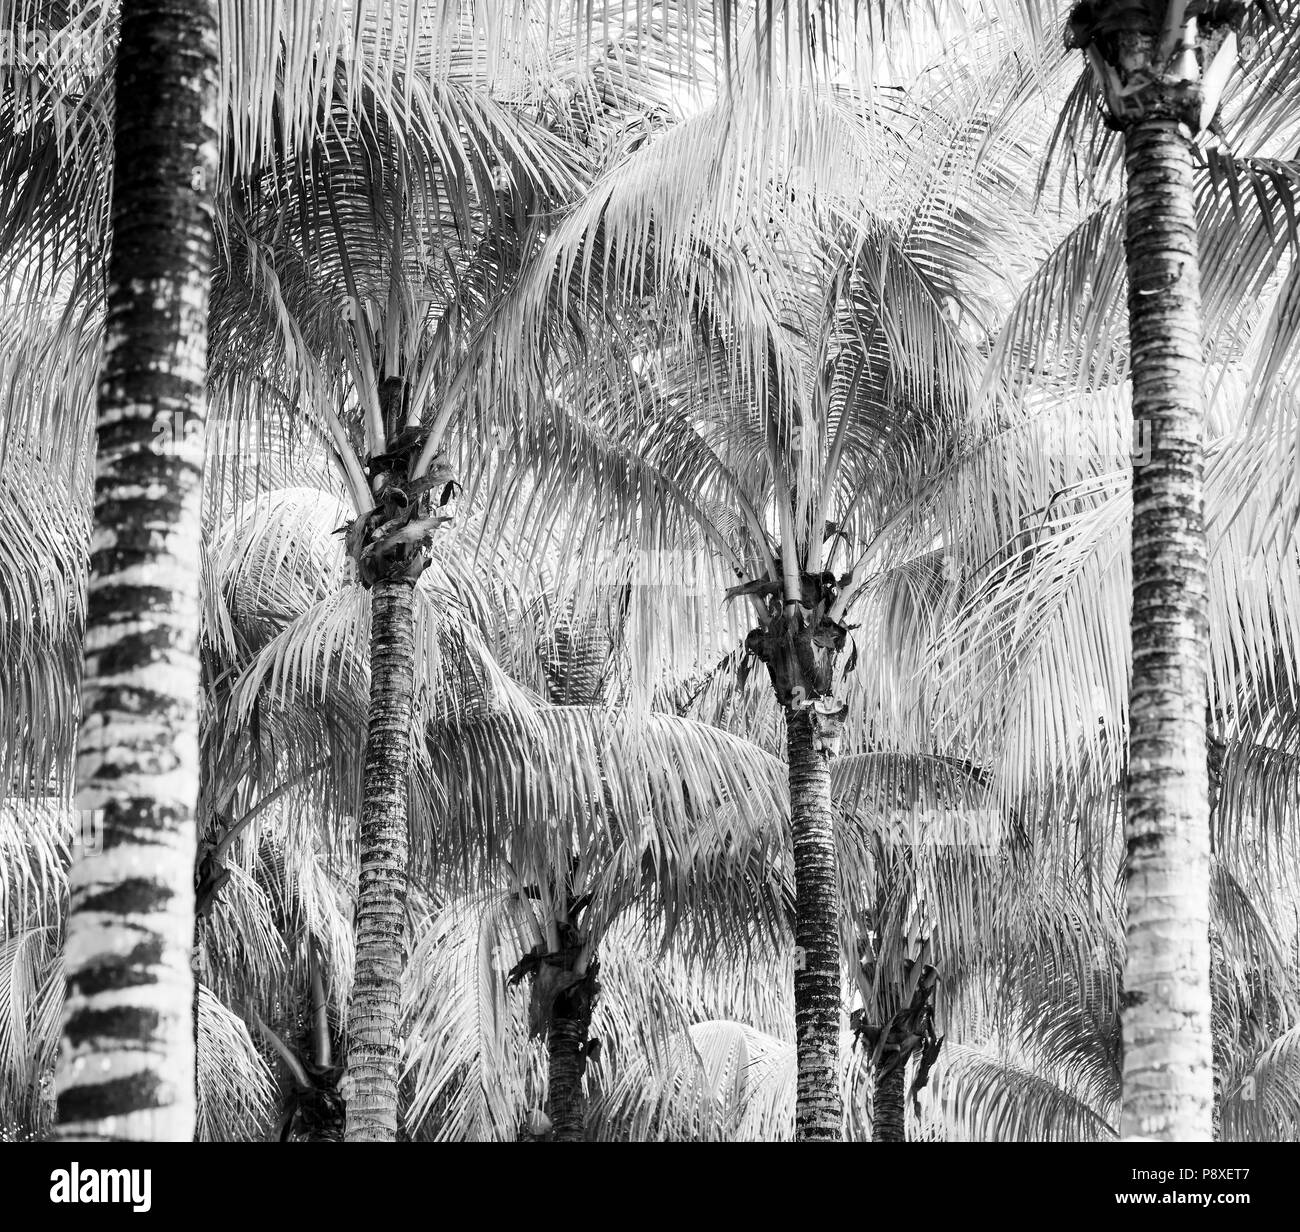 Lush green palm tree fronds in black and white Stock Photo